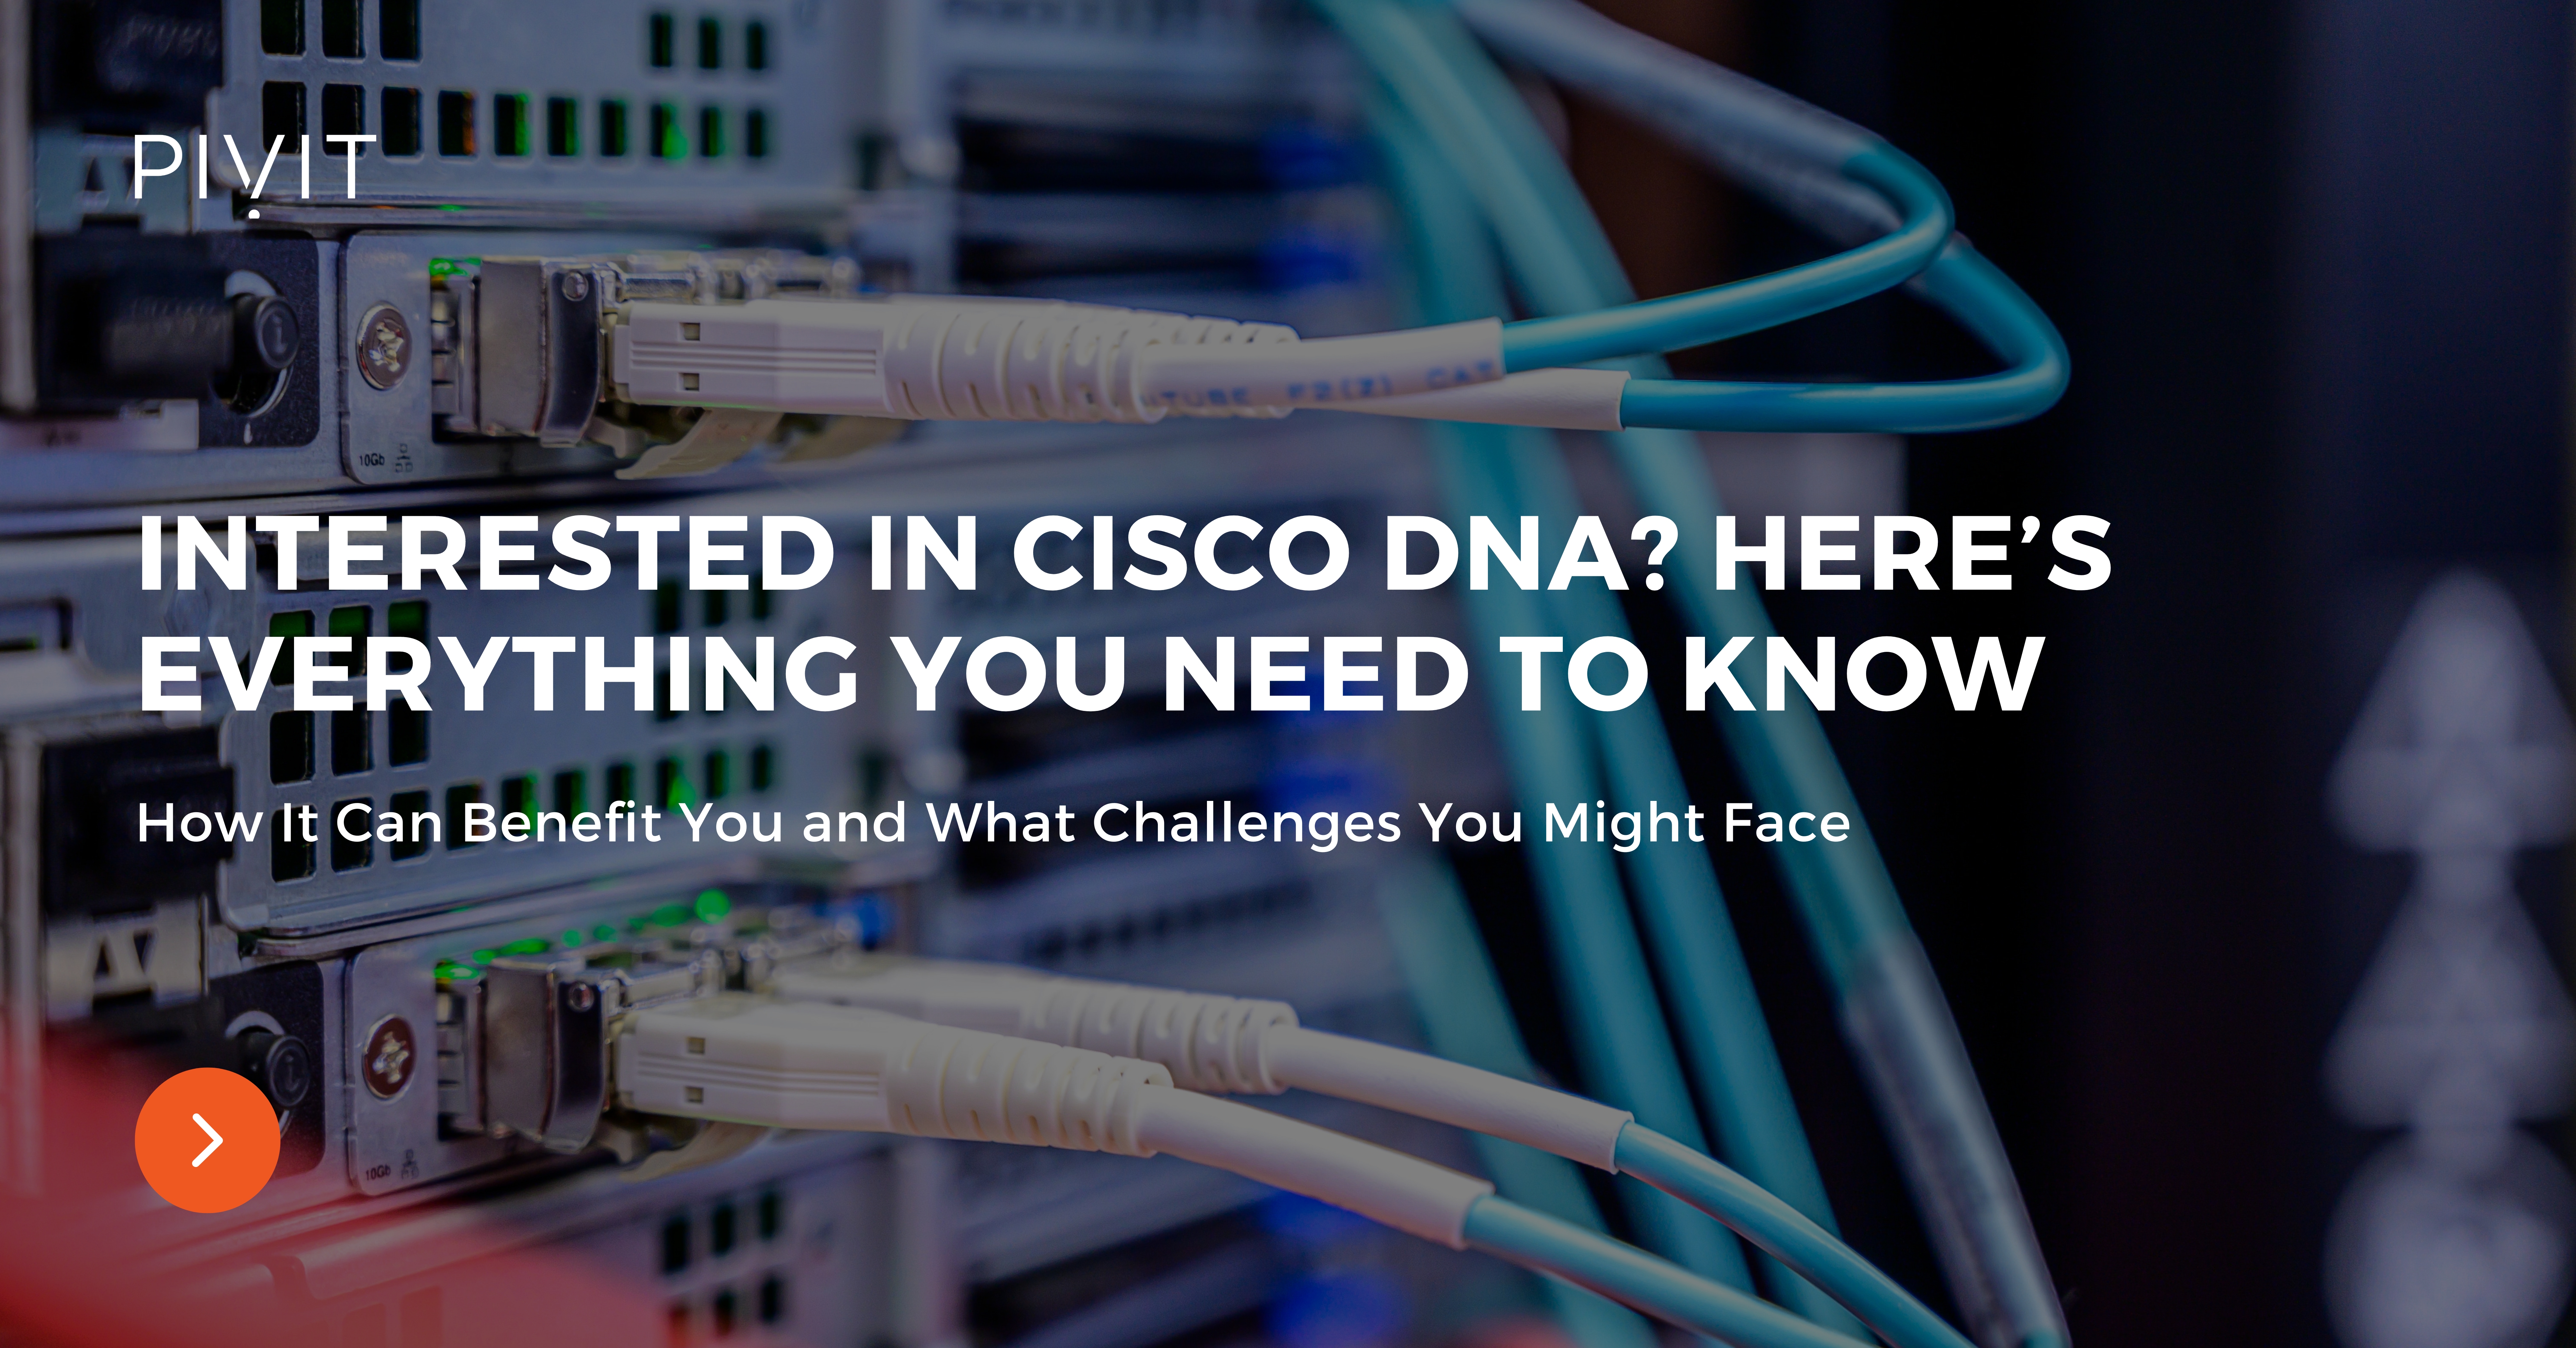 Interested in Cisco DNA - Here’s Everything You Need to Know